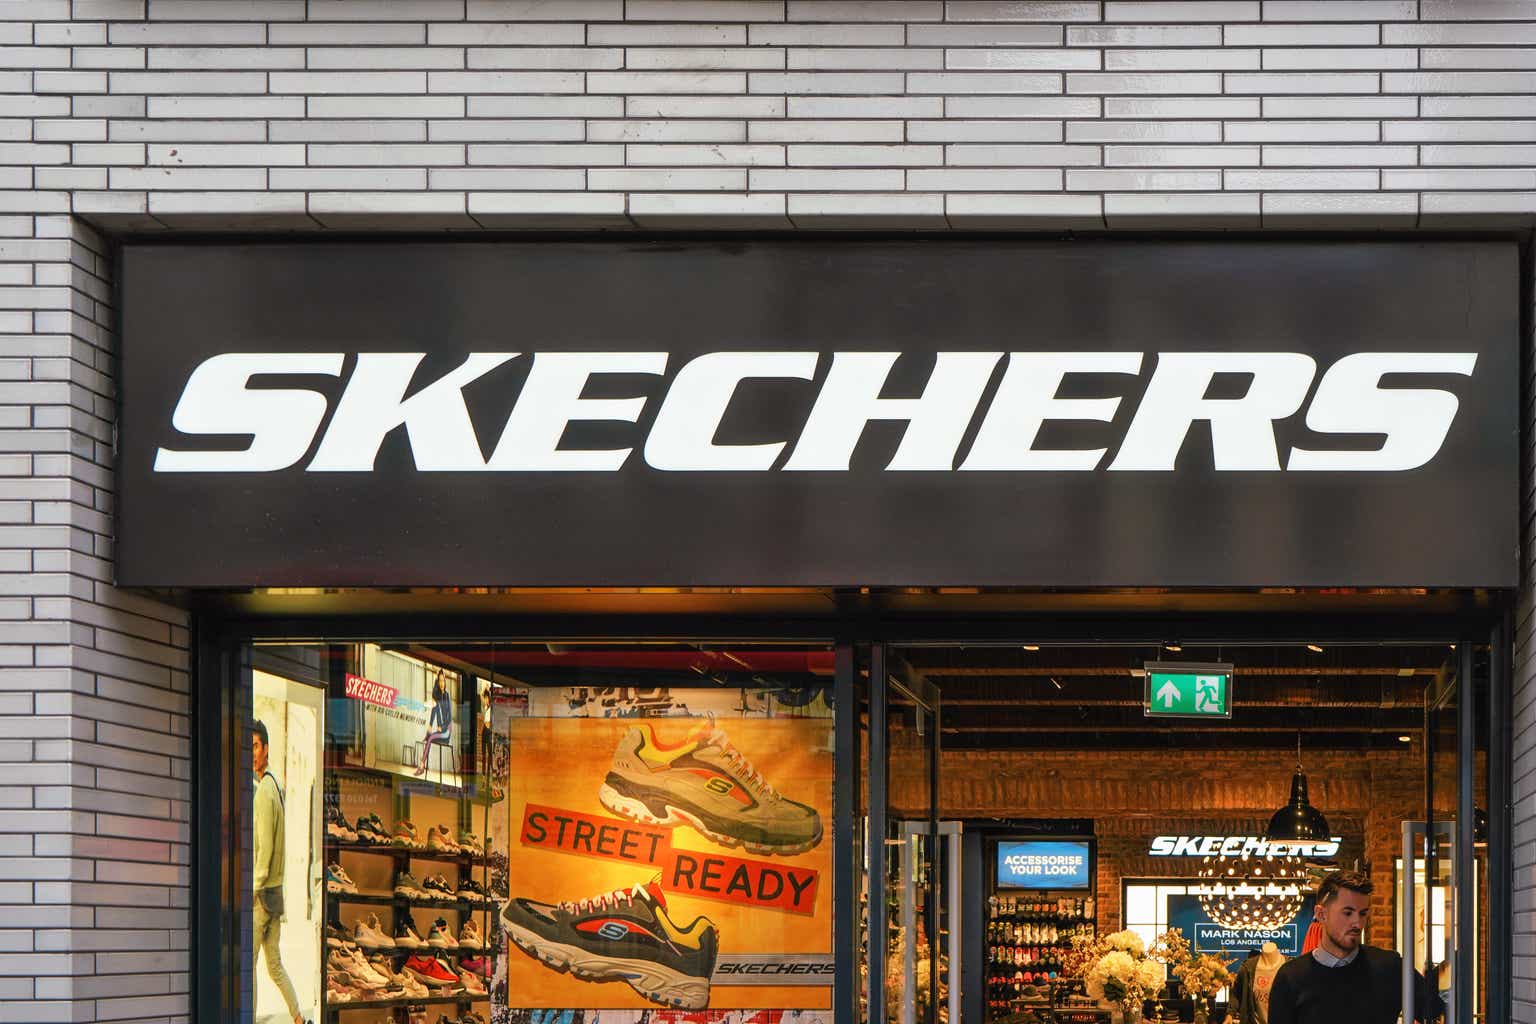 Tom Audreath rekruut Gepland Skechers: Disciplined Growth Makes This A Quality Holding (NYSE:SKX) |  Seeking Alpha